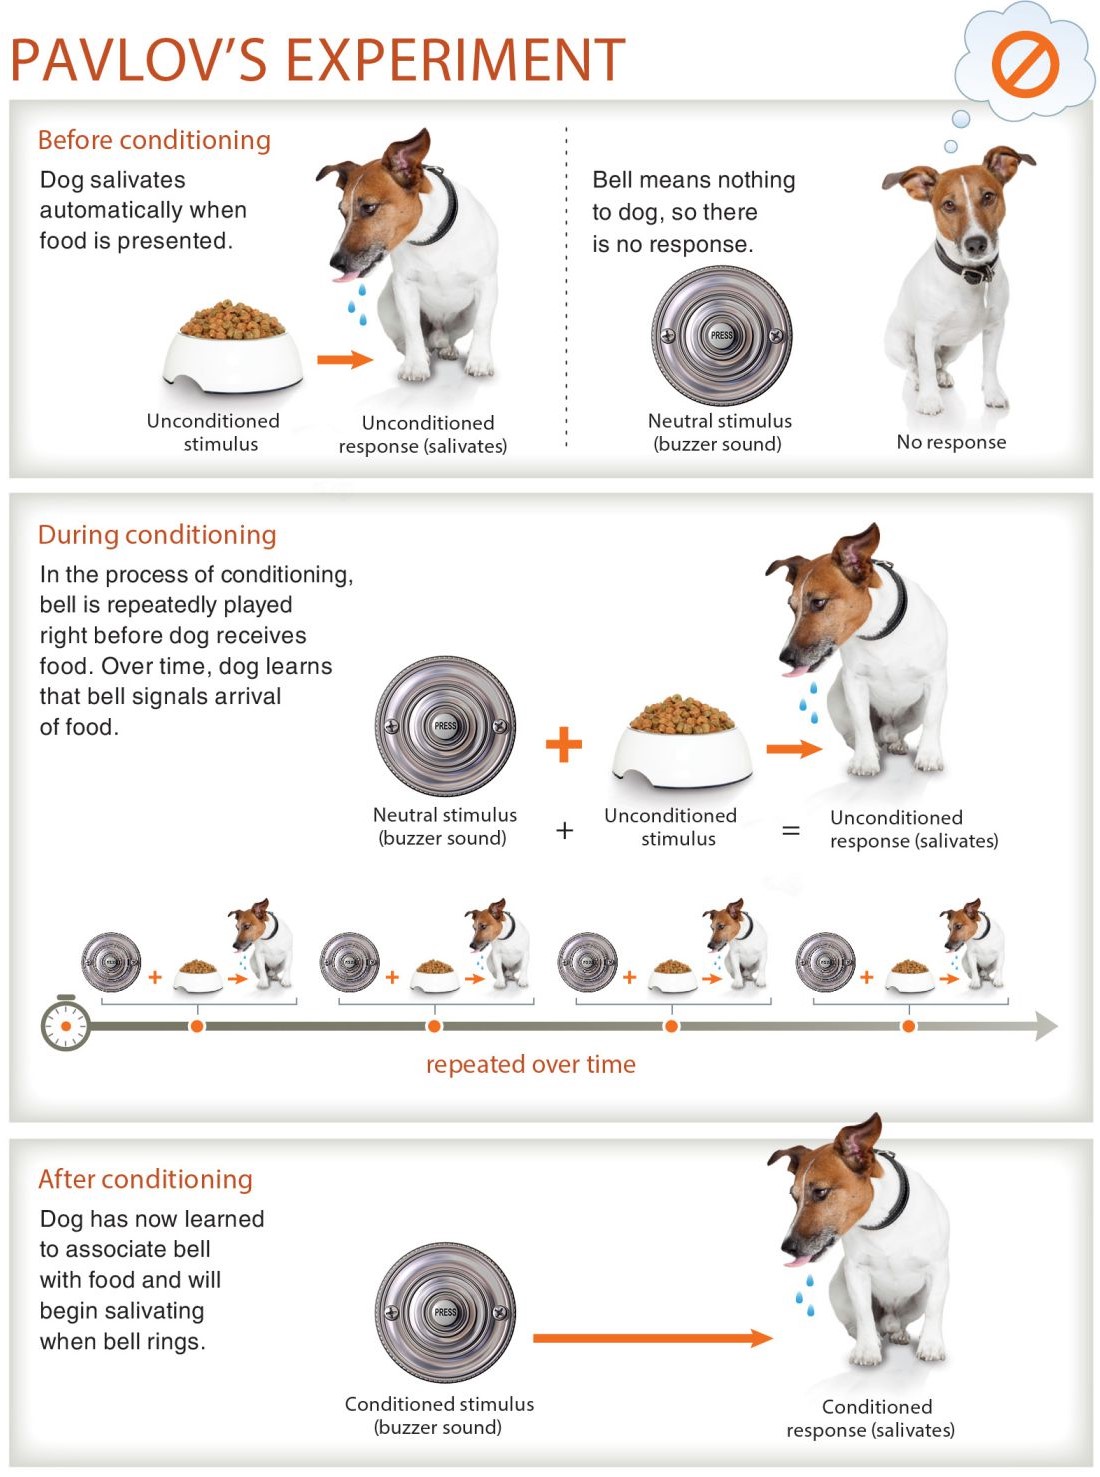 Pavlov’s experiment about classical conditioning.